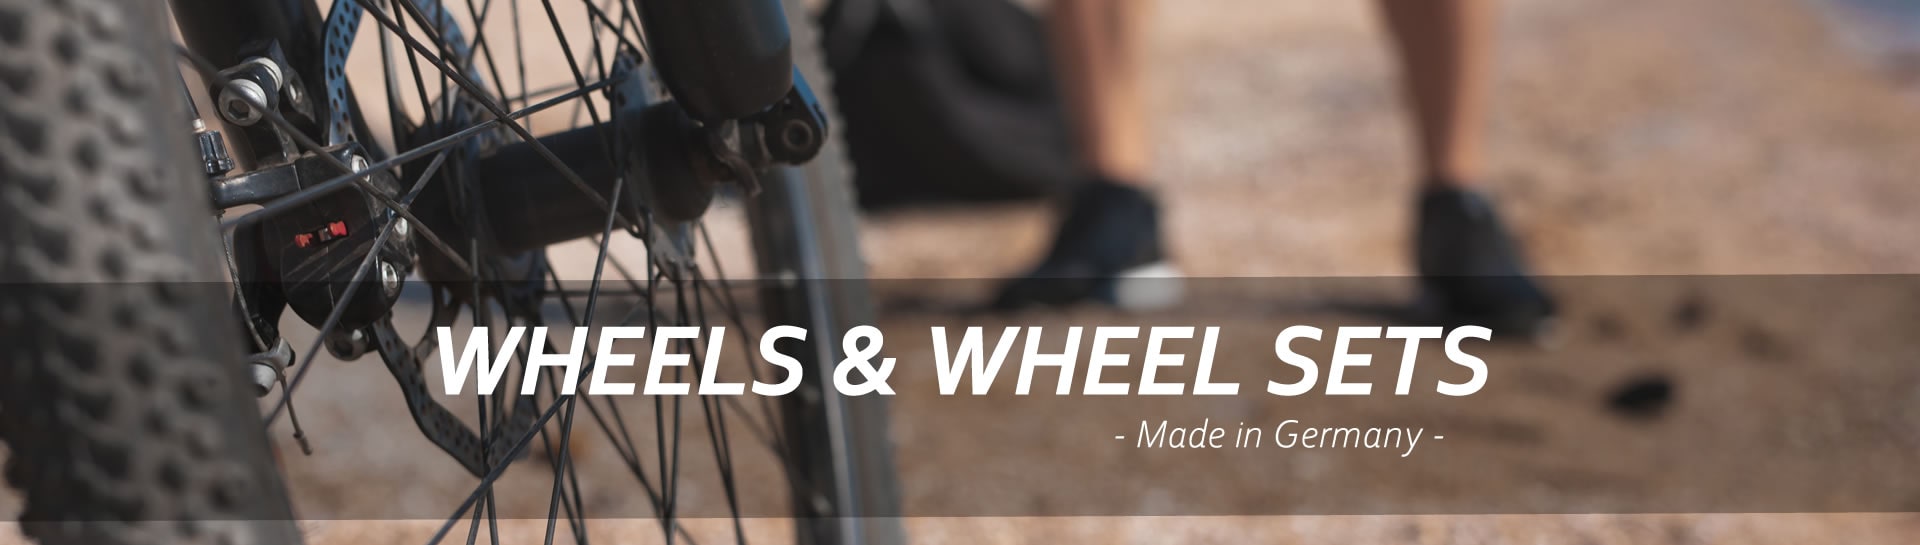 Taylor Wheels - Bicycle Parts and Accessories » To the online shop Taylor Wheels